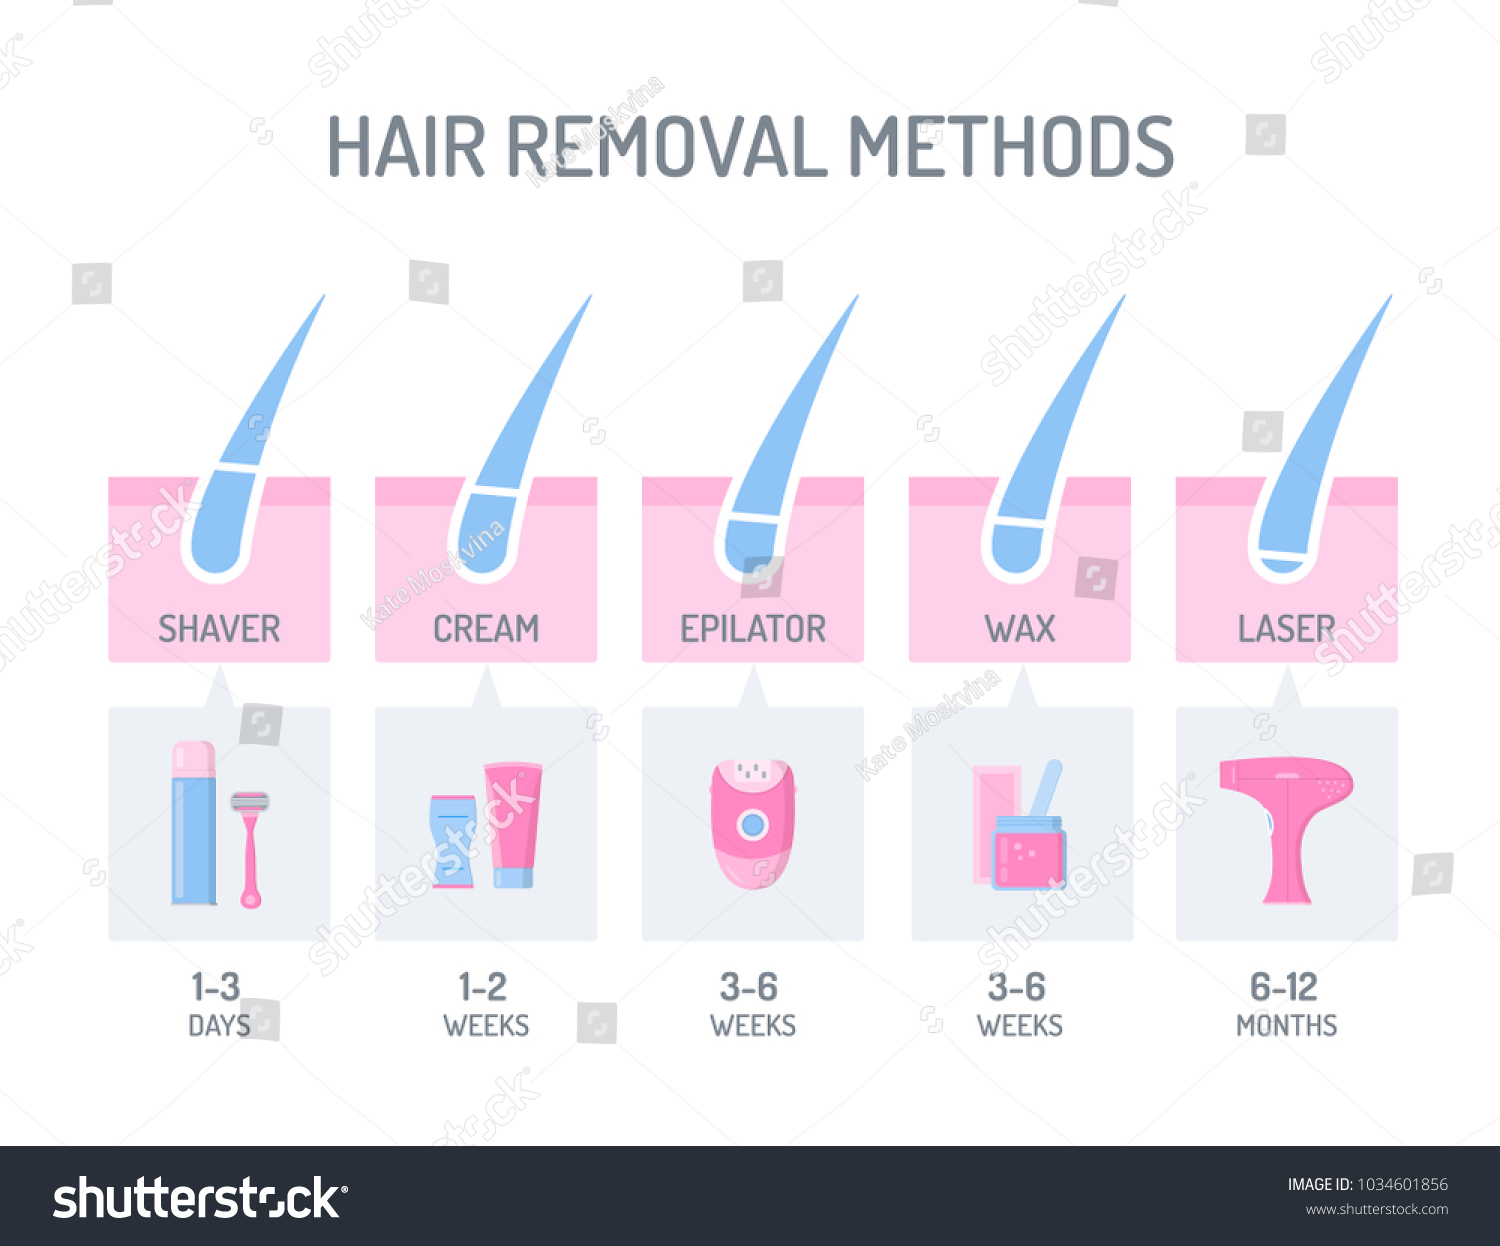 Laser Hair Removal Near Me